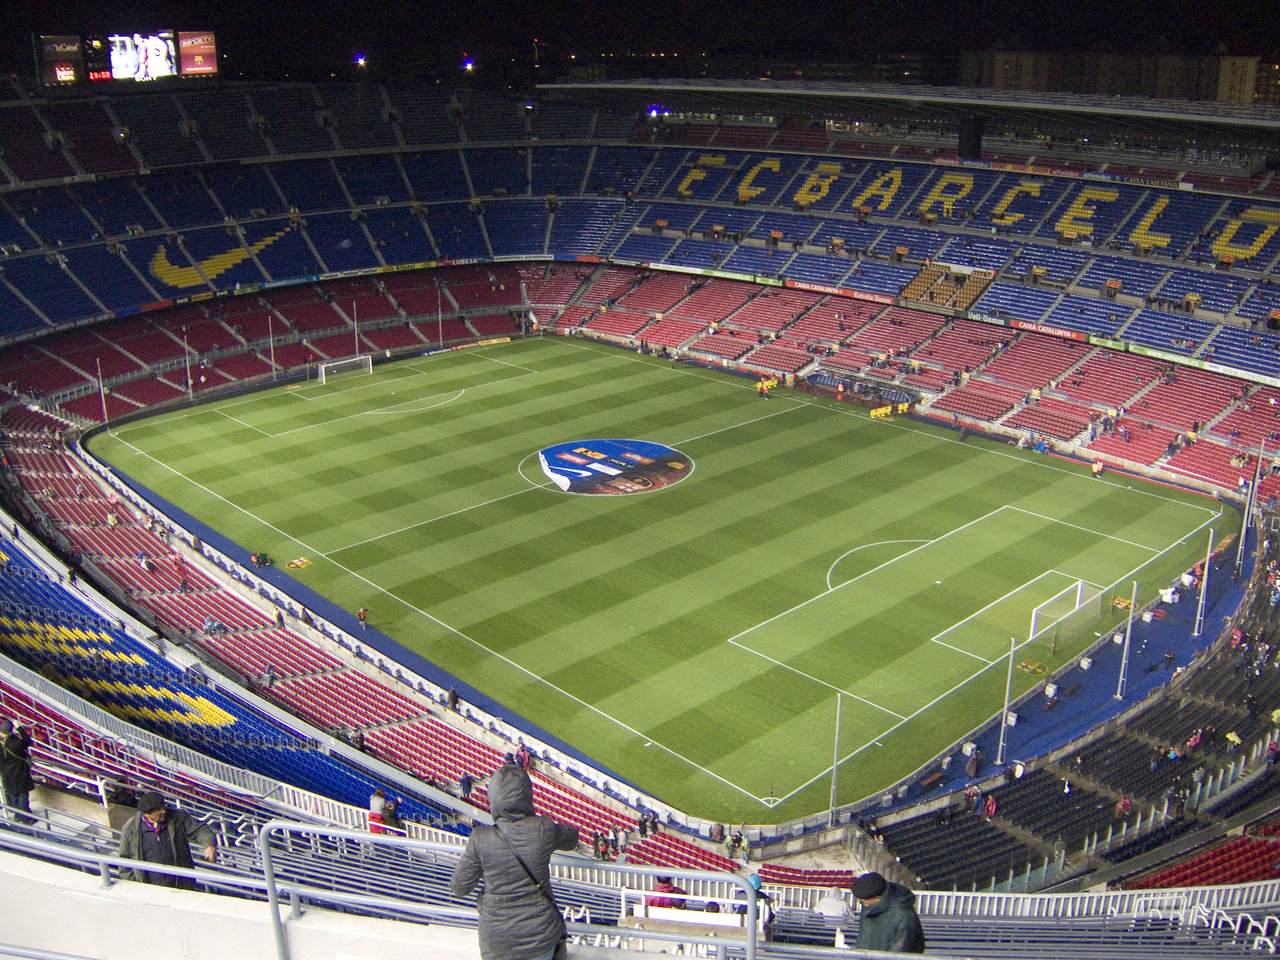 Football players in Brief Football stadiums